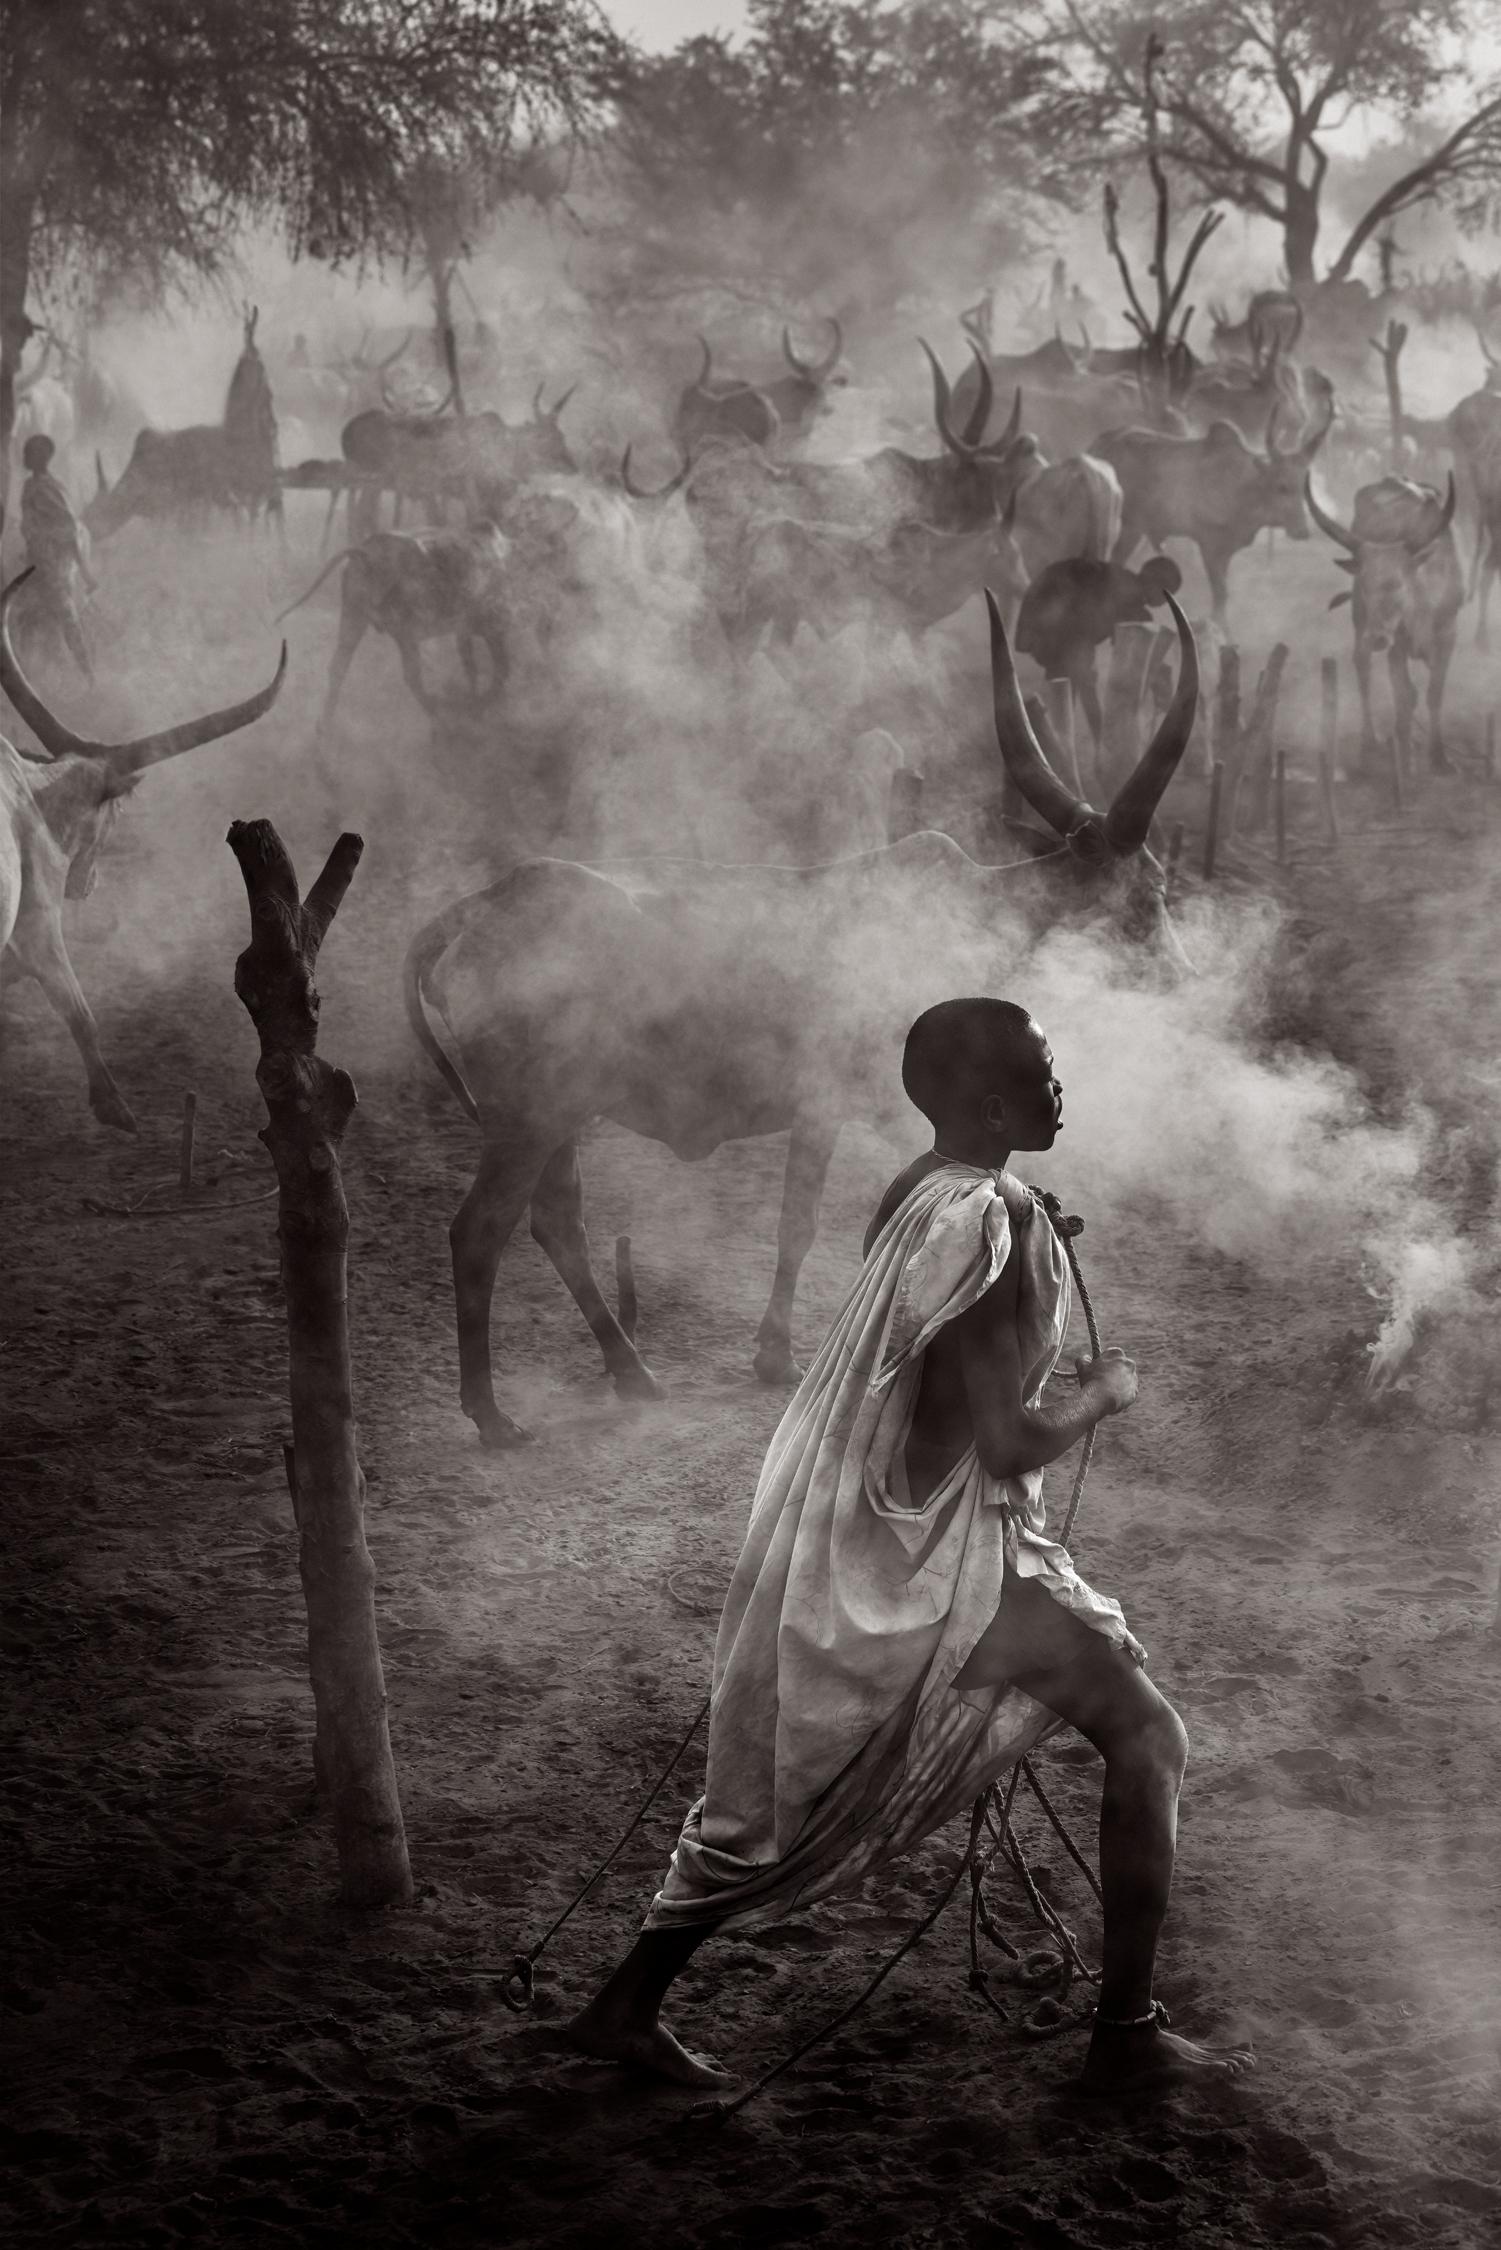 Drew Doggett Black and White Photograph - Young Boy Walking Through the Cattle Camps at Dusk, Black & White, Surreal 